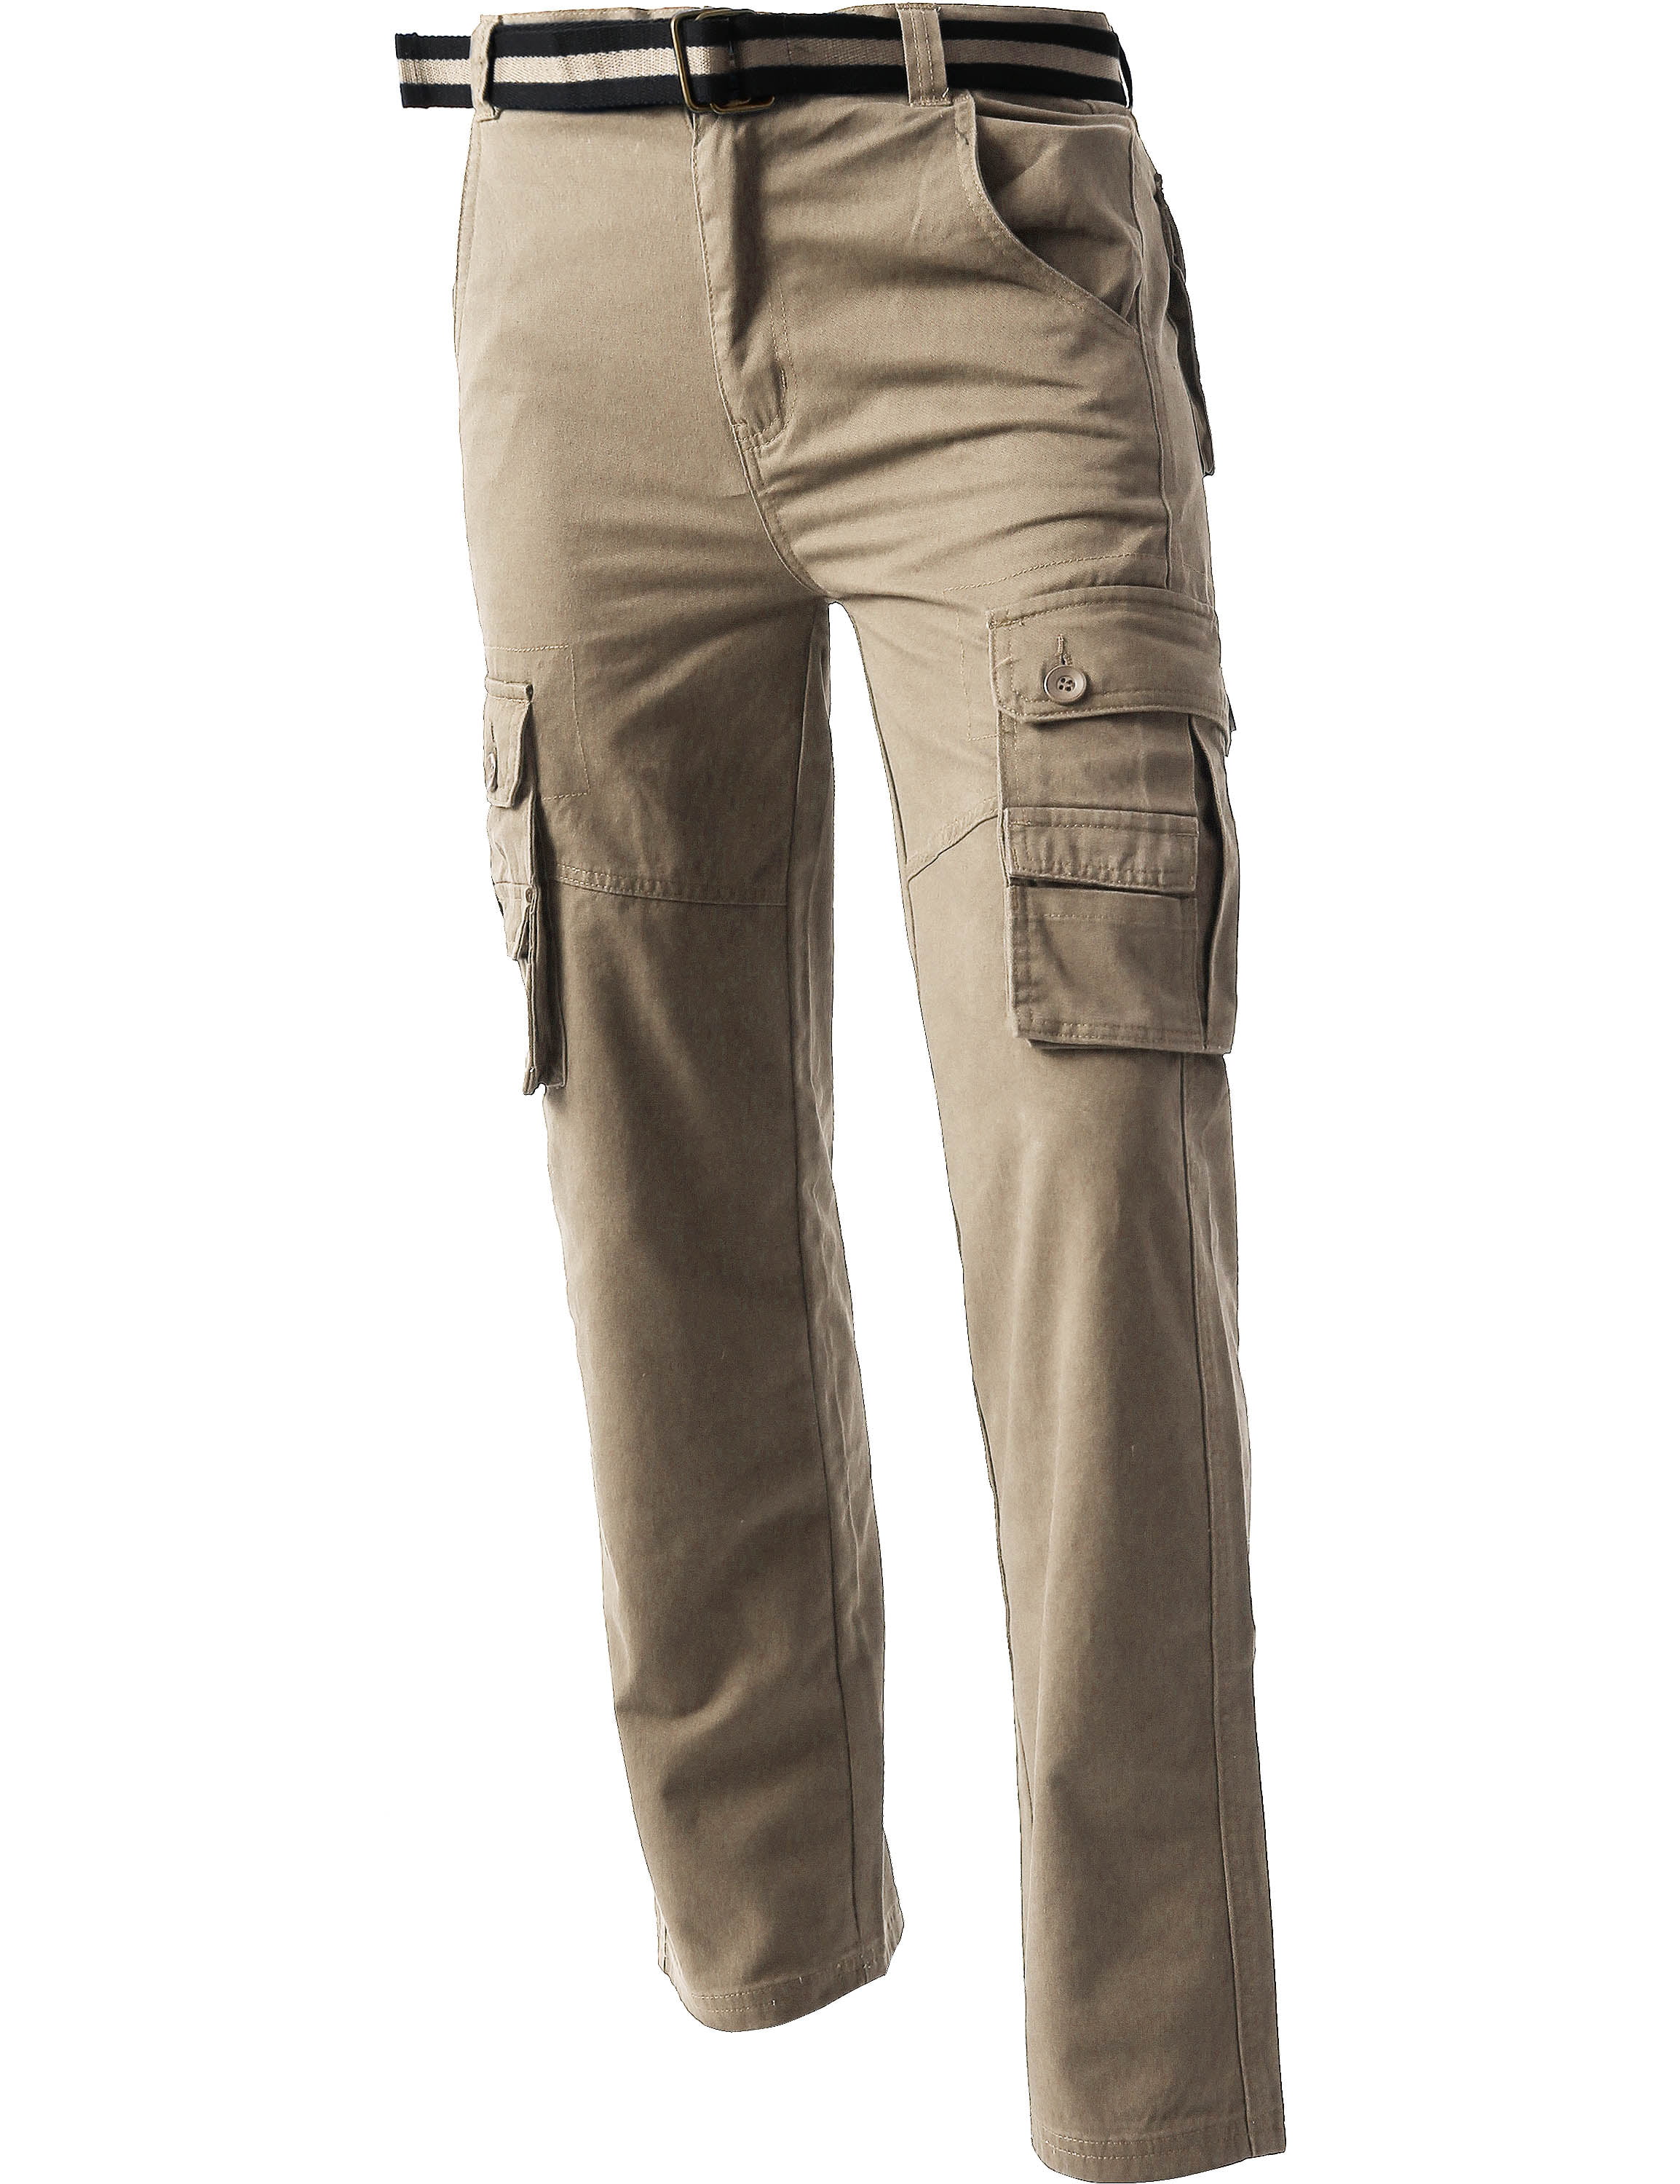 Ma Croix Mens CARGO PANTS with Utility Belt Lightweight Relaxed ...